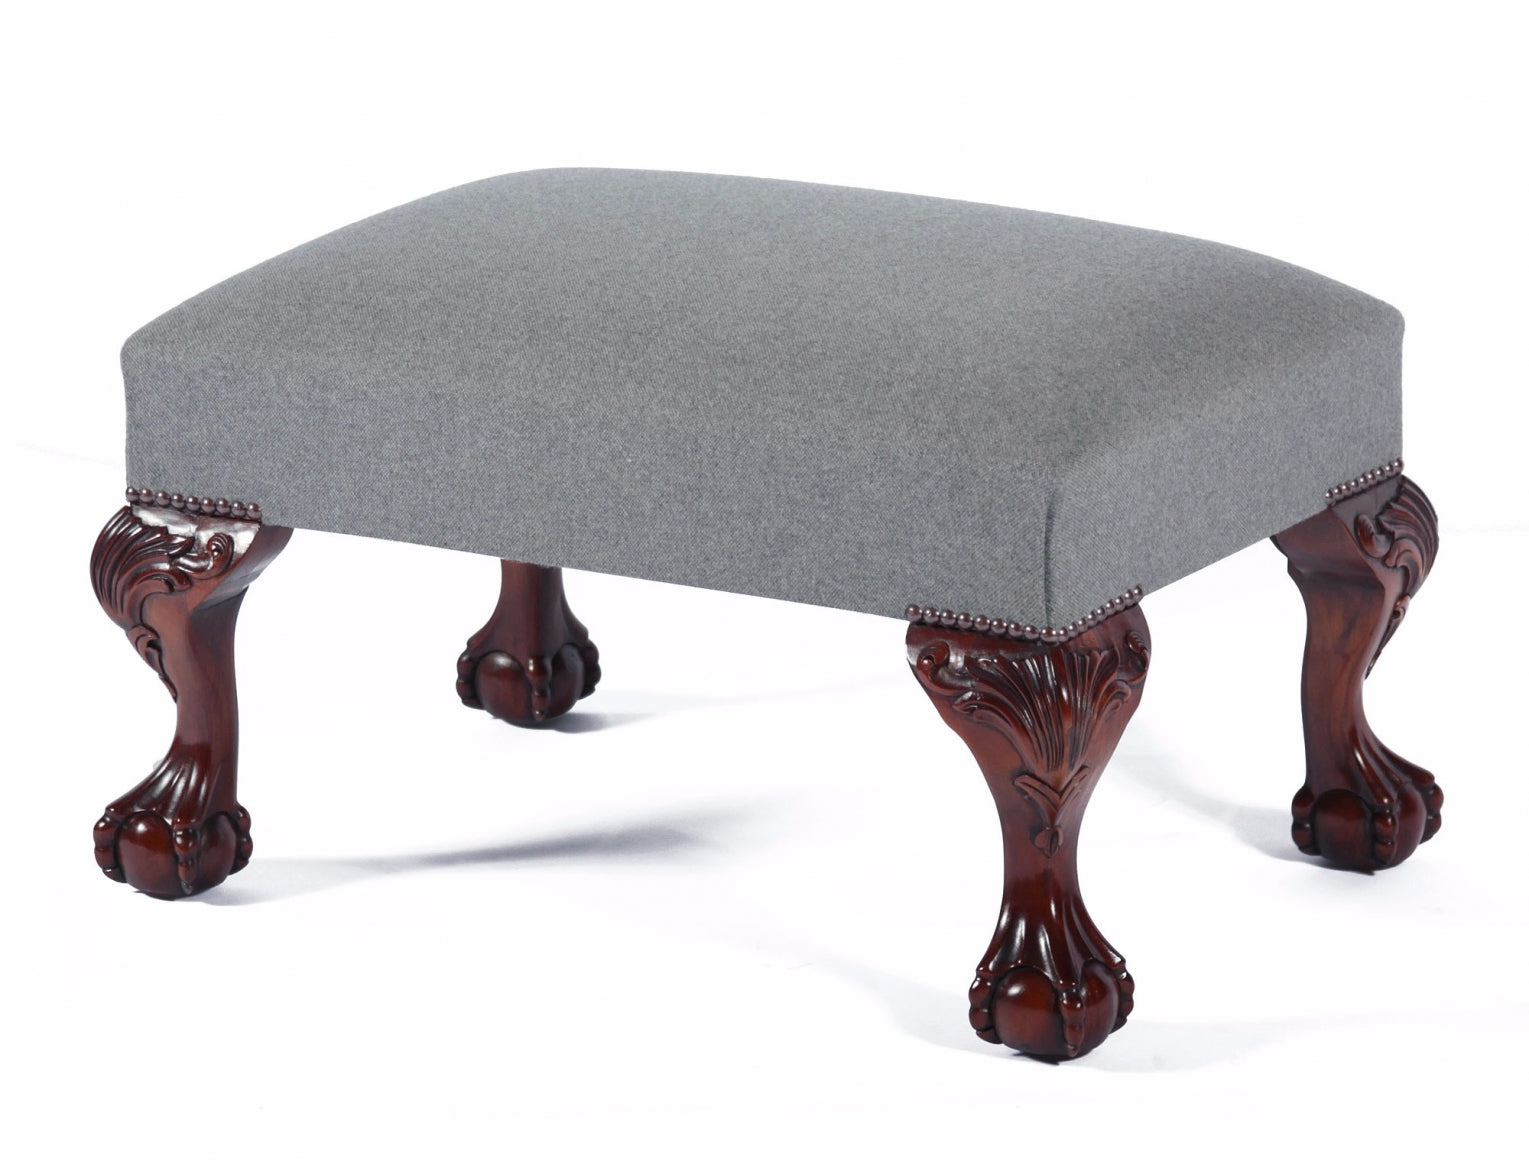 Footstool in Merino wool with ball and claw legs